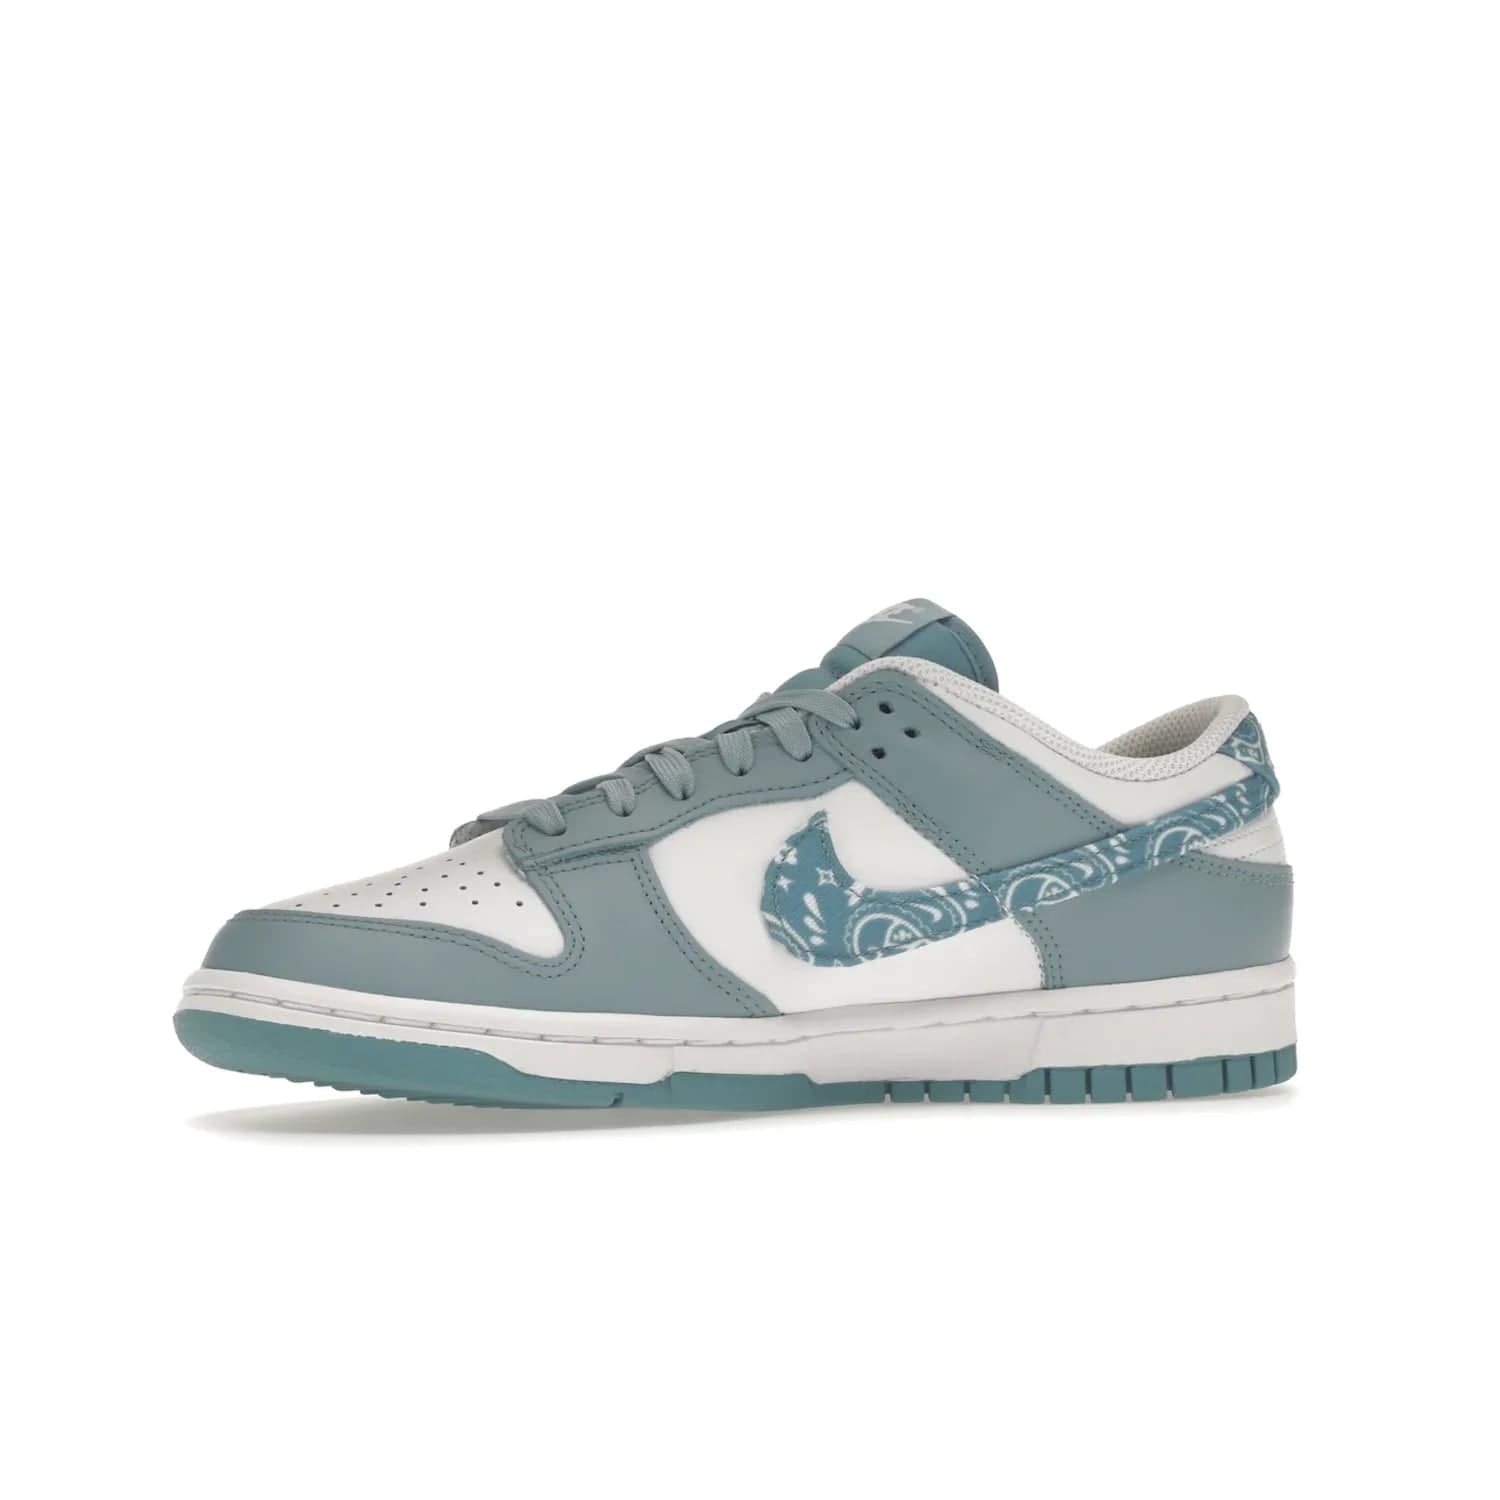 Nike Dunk Low Essential Paisley Pack Worn Blue (Women's) - Image 17 - Only at www.BallersClubKickz.com - Get the Nike Dunk Low Essential Paisley Pack Worn Blue (Women's) for style and comfort. White leather construction, light blue leather overlays, canvas Swooshes and matching heel tabs offer a rich blue hue. Finished by a white and light blue sole, this classic Nike Dunk is the perfect addition to any wardrobe. Released in March 2022.